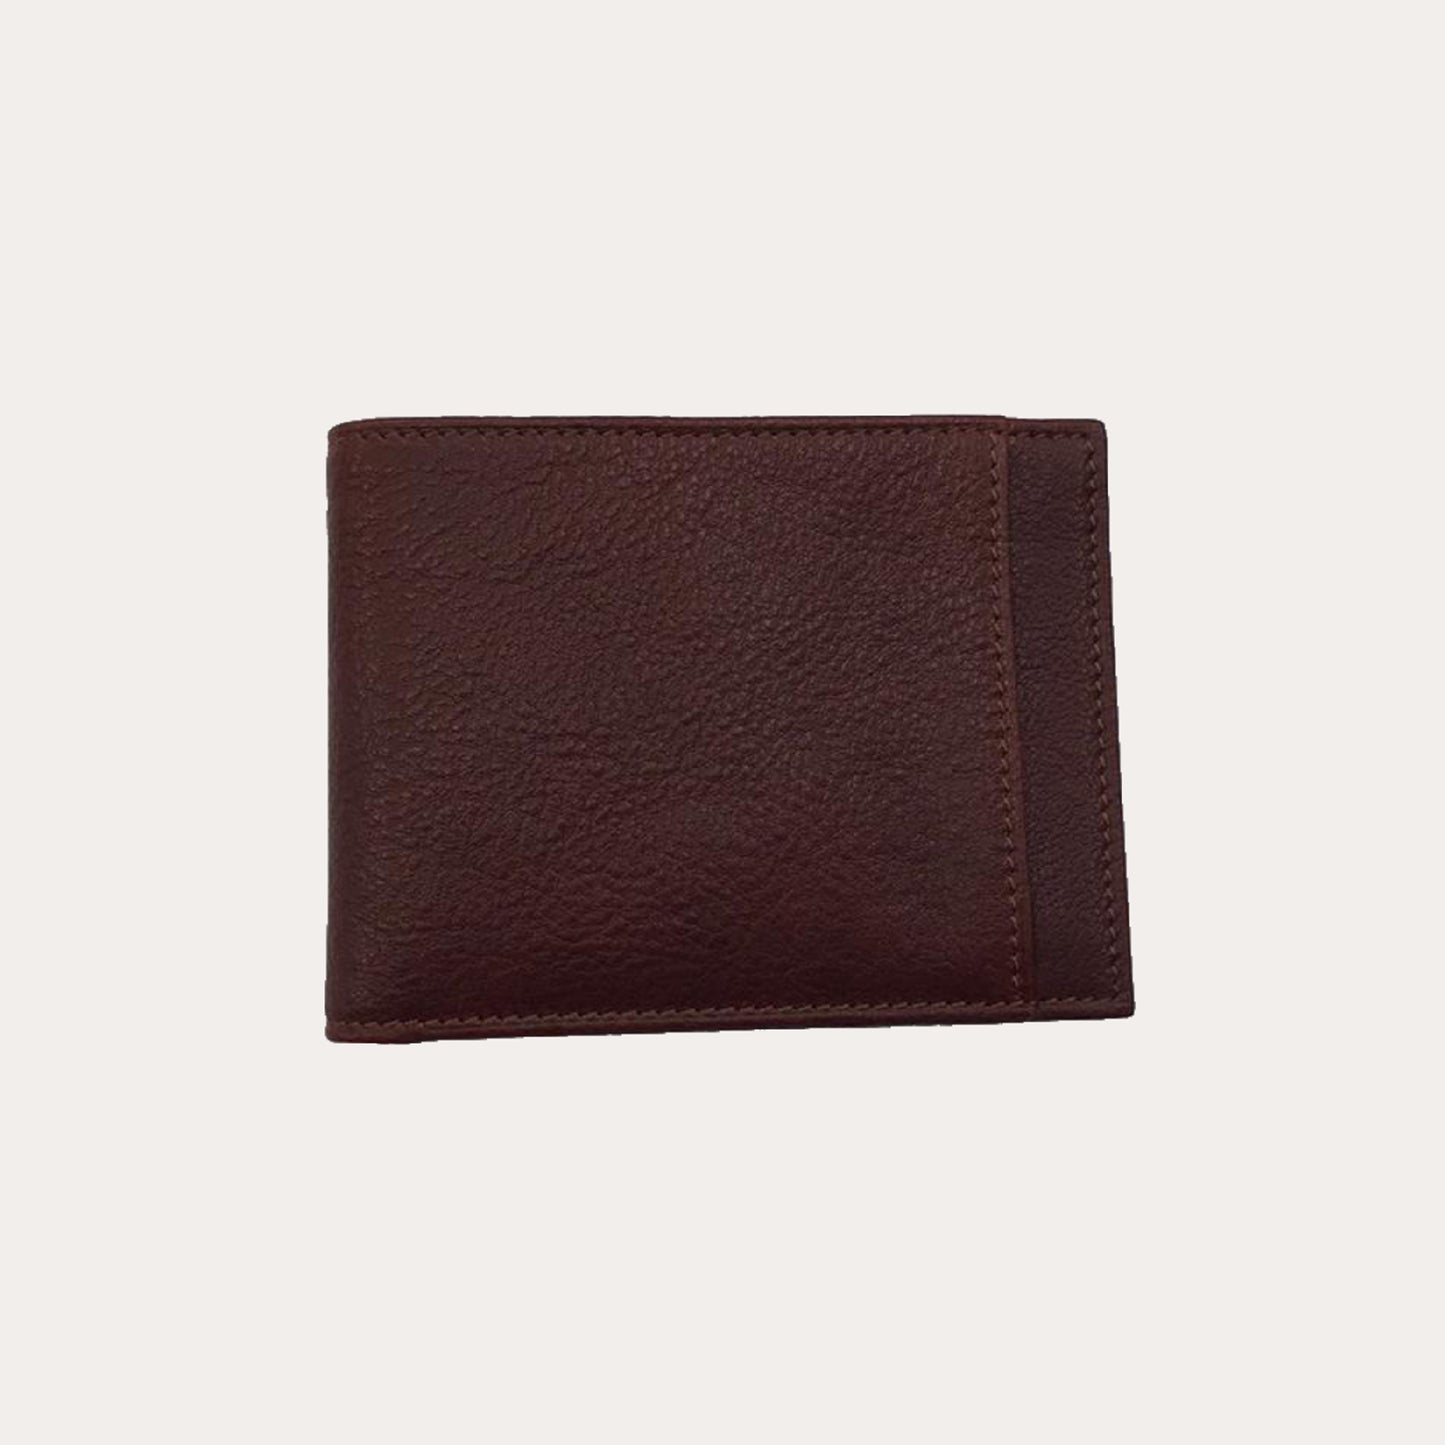 Maroon Vacchetta Leather Wallet-3 Credit Card/Coin Section